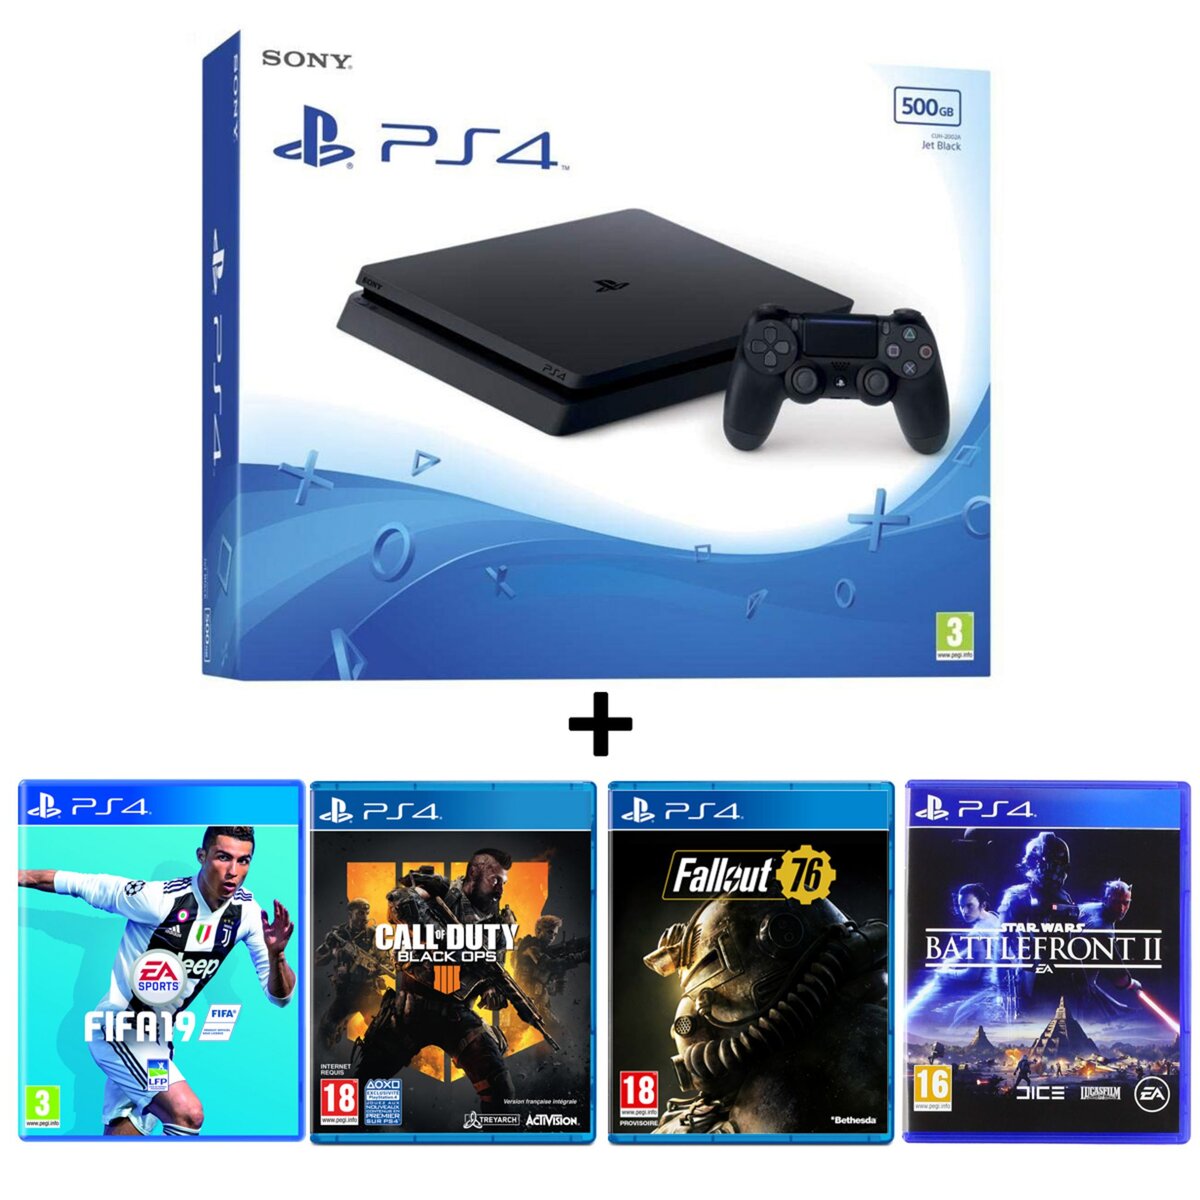 Console PS4 Slim 500 Go + FIFA 19 + Call Of Duty Black Ops 4 + Fallout 76 + Battlefront 2